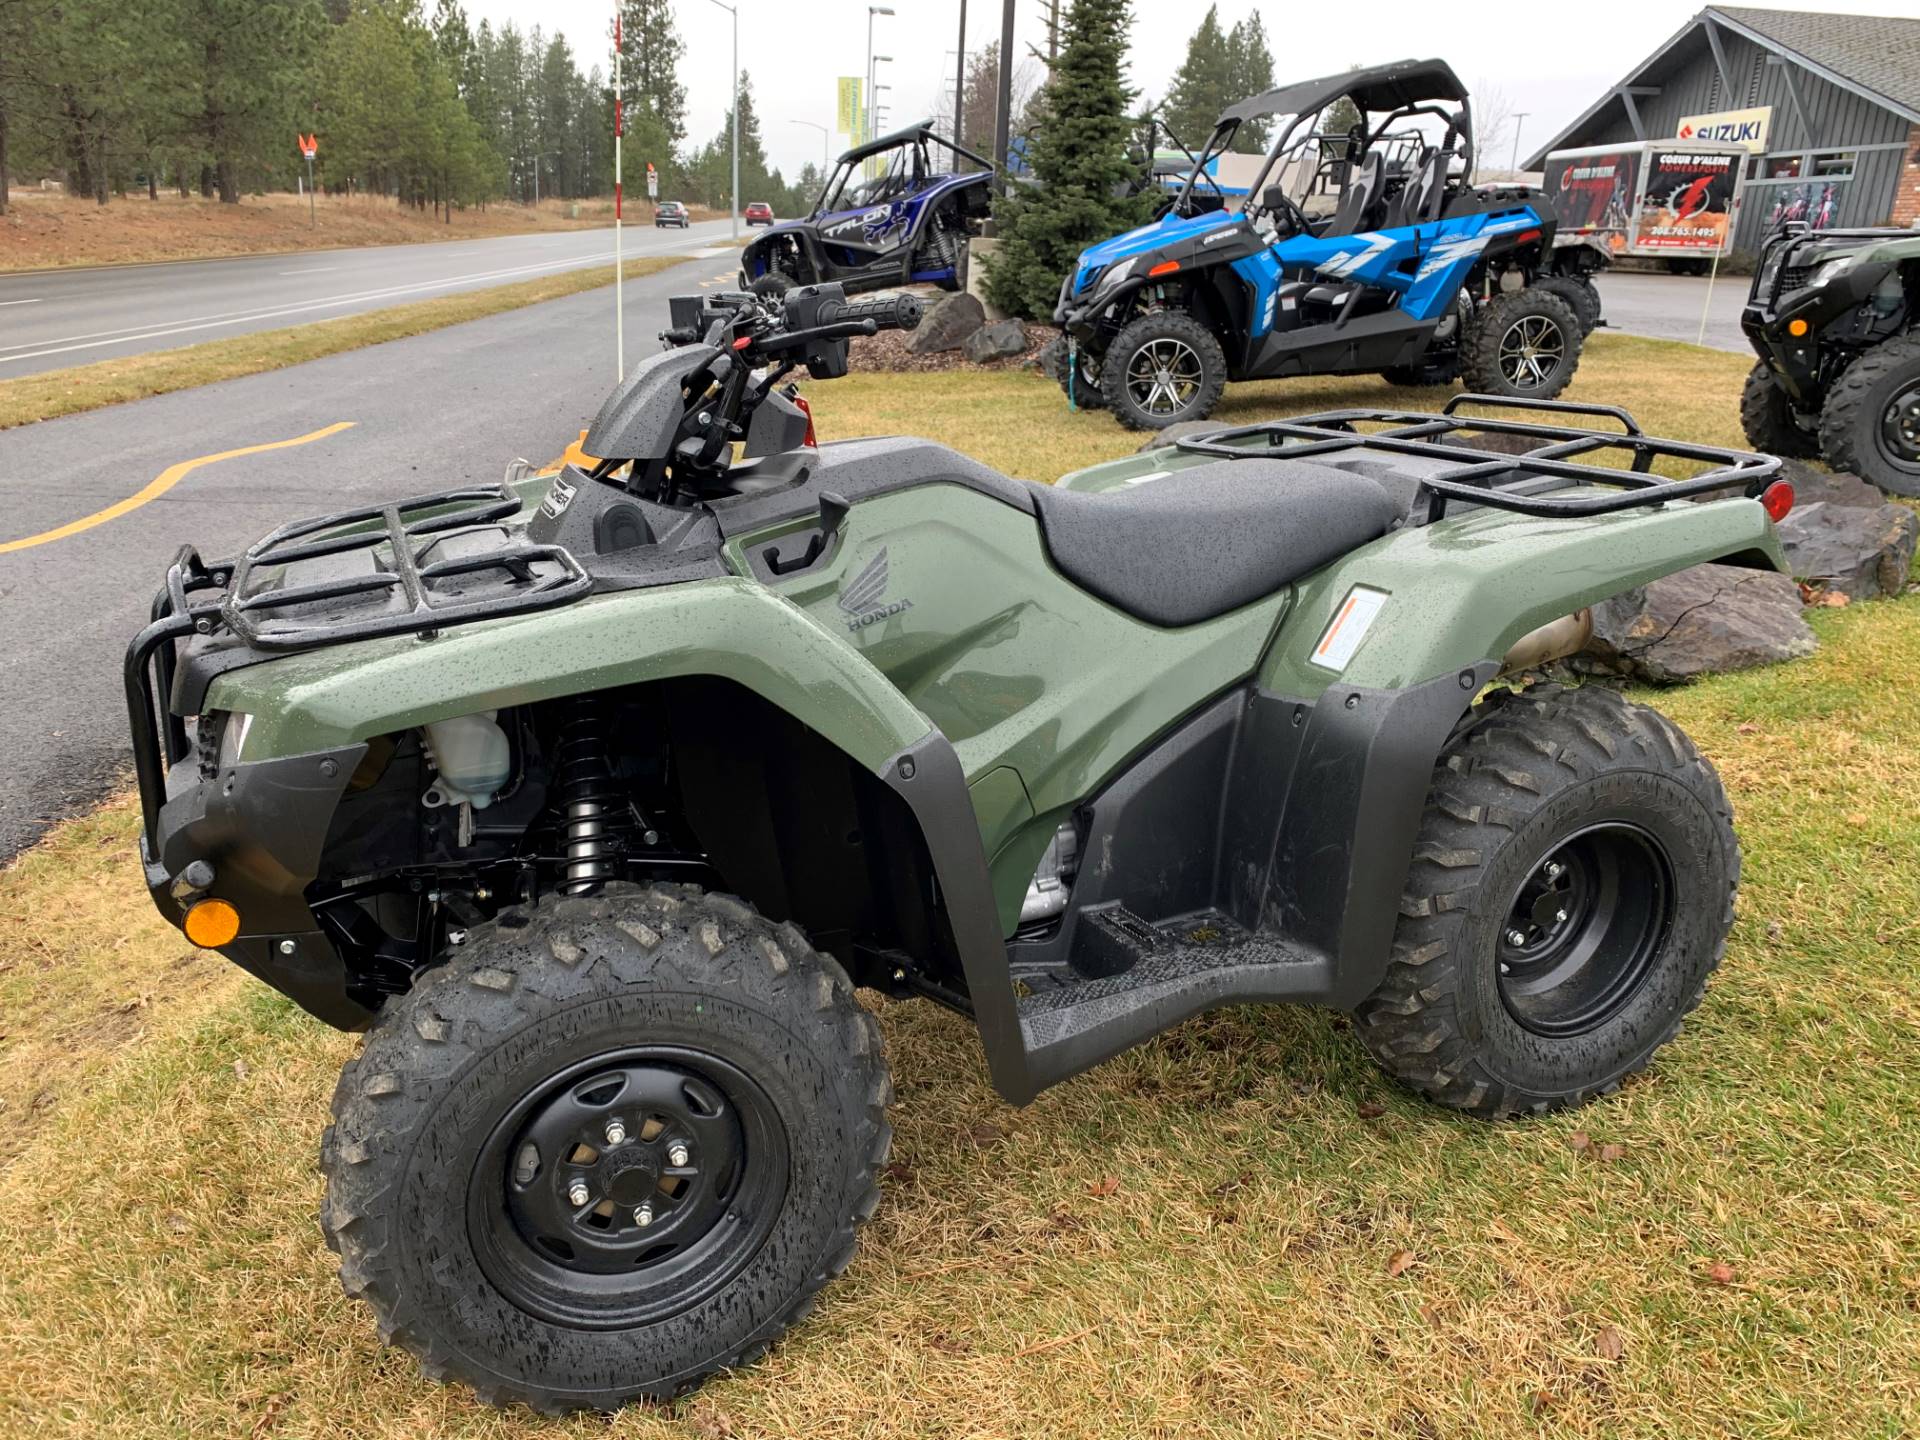 Honda Rancher 4x4 Price How do you Price a Switches?